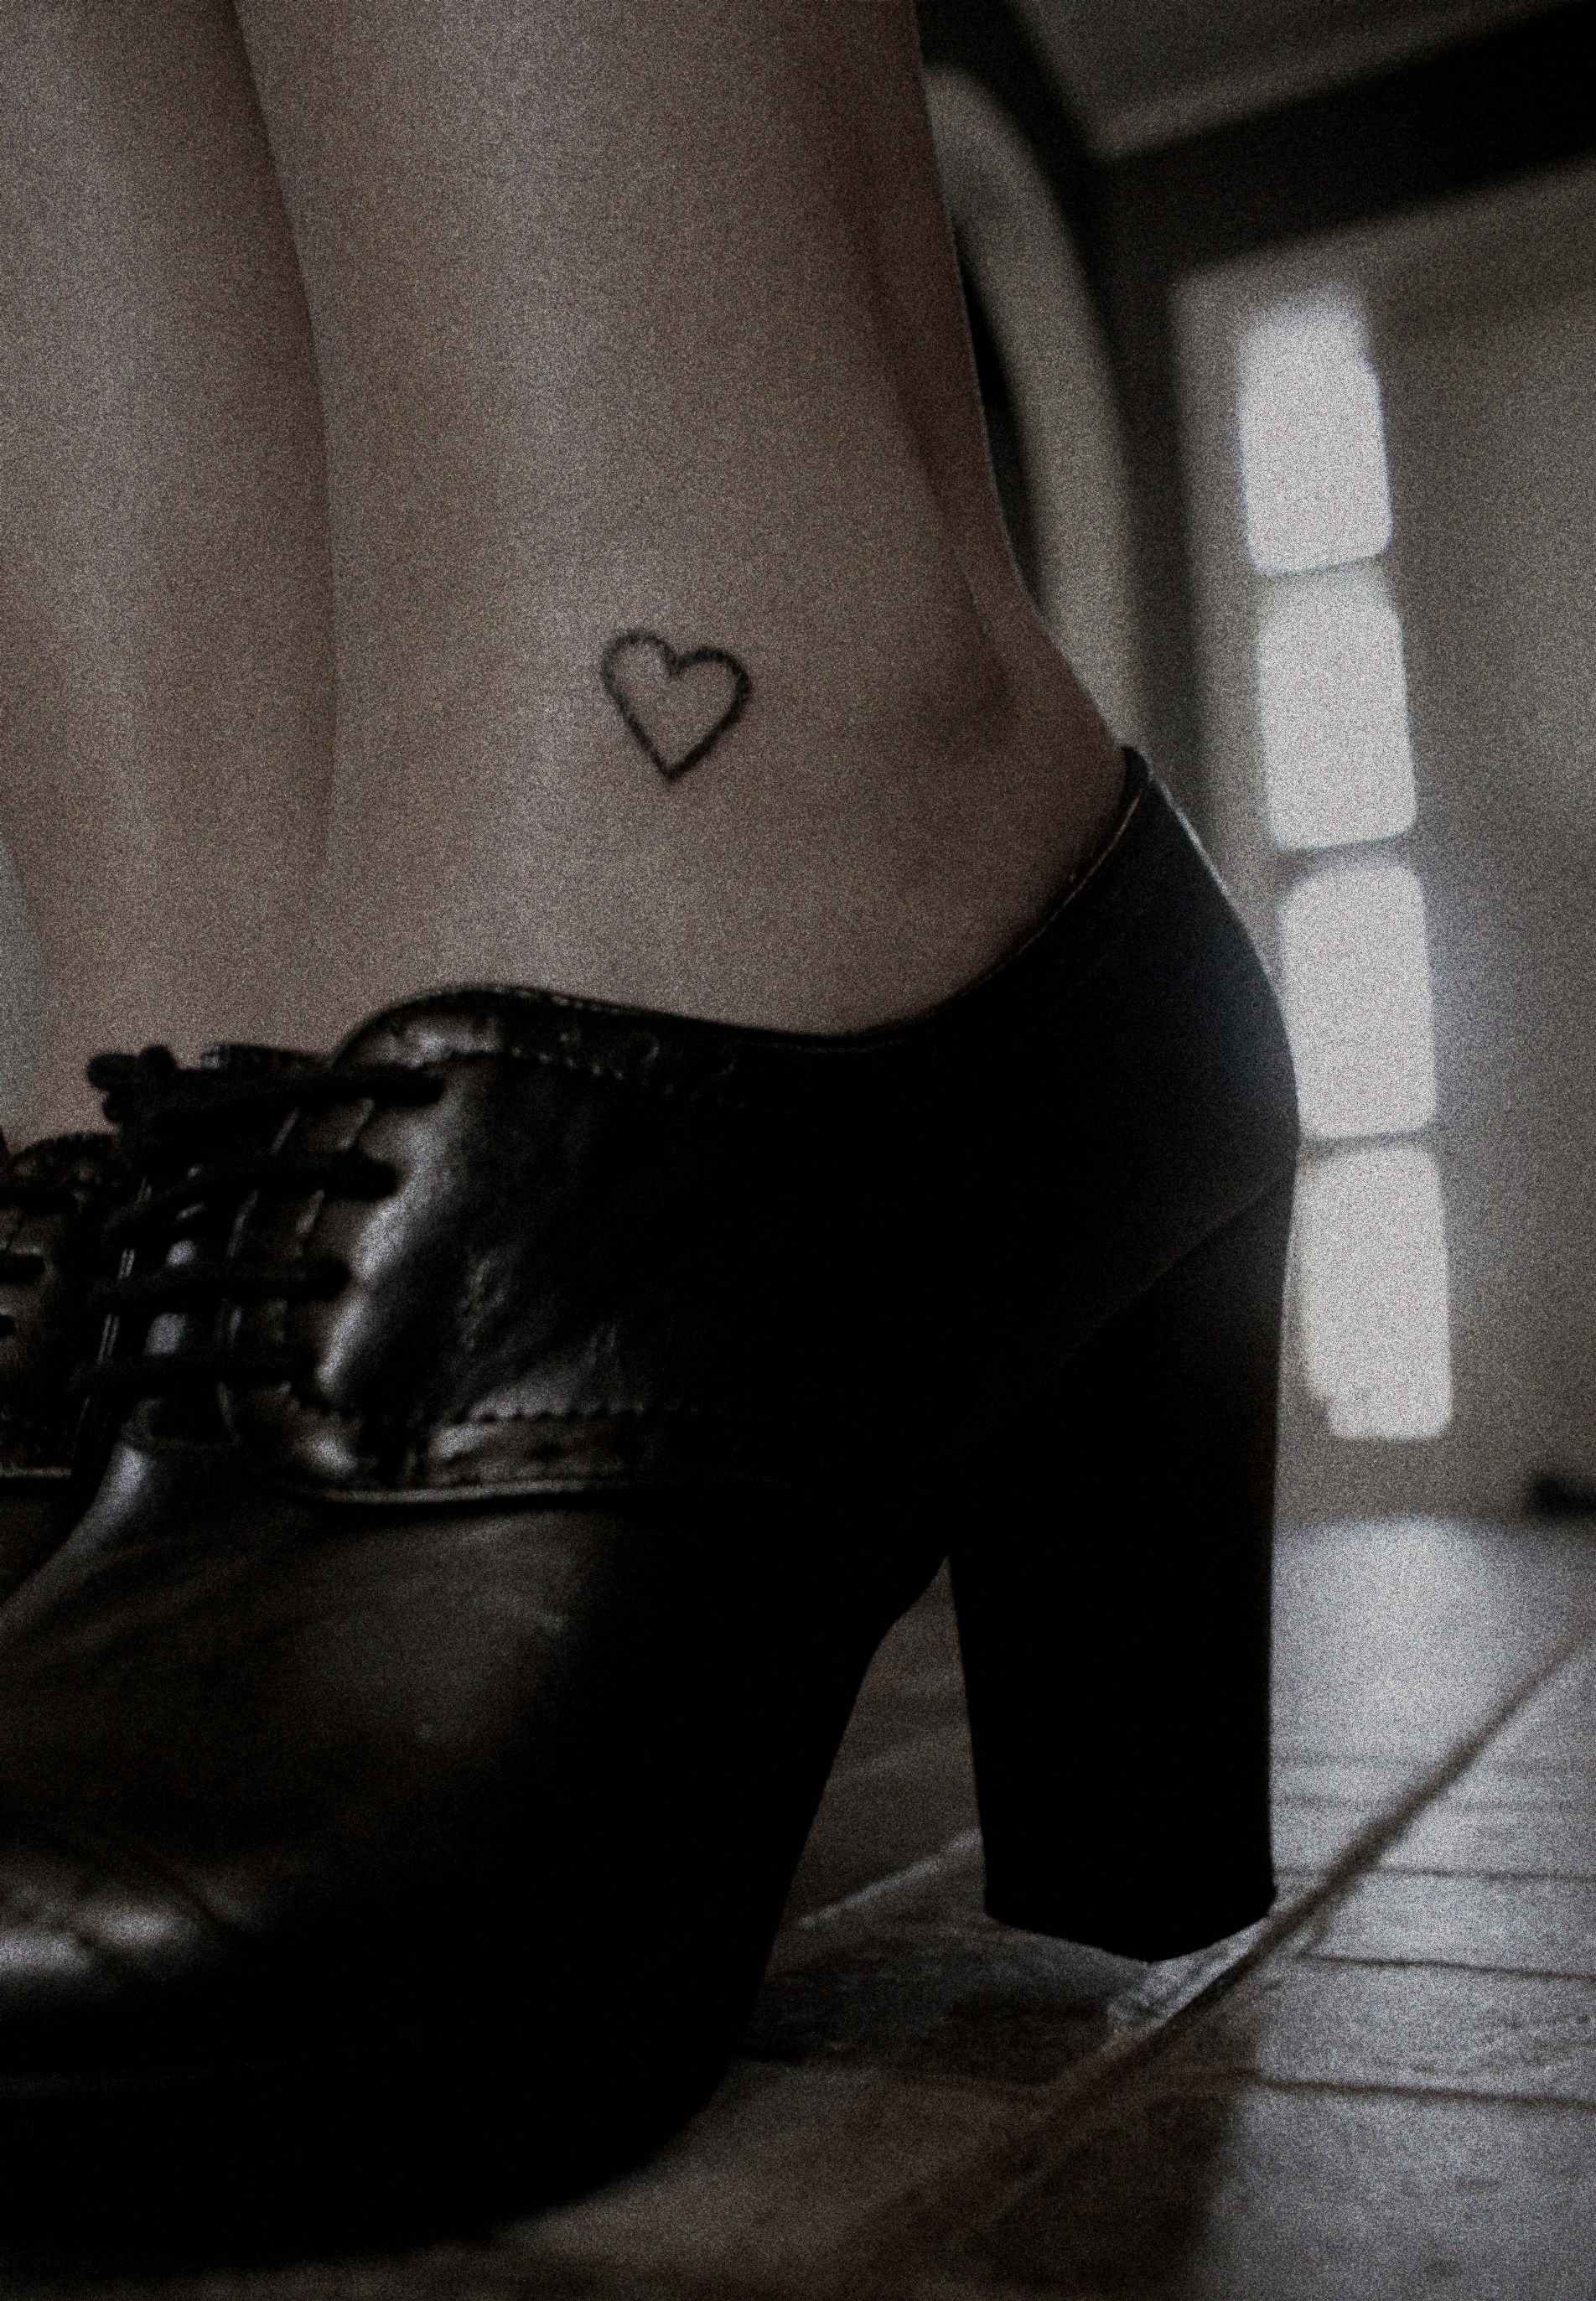 Girl With Outline Heart Tattoo